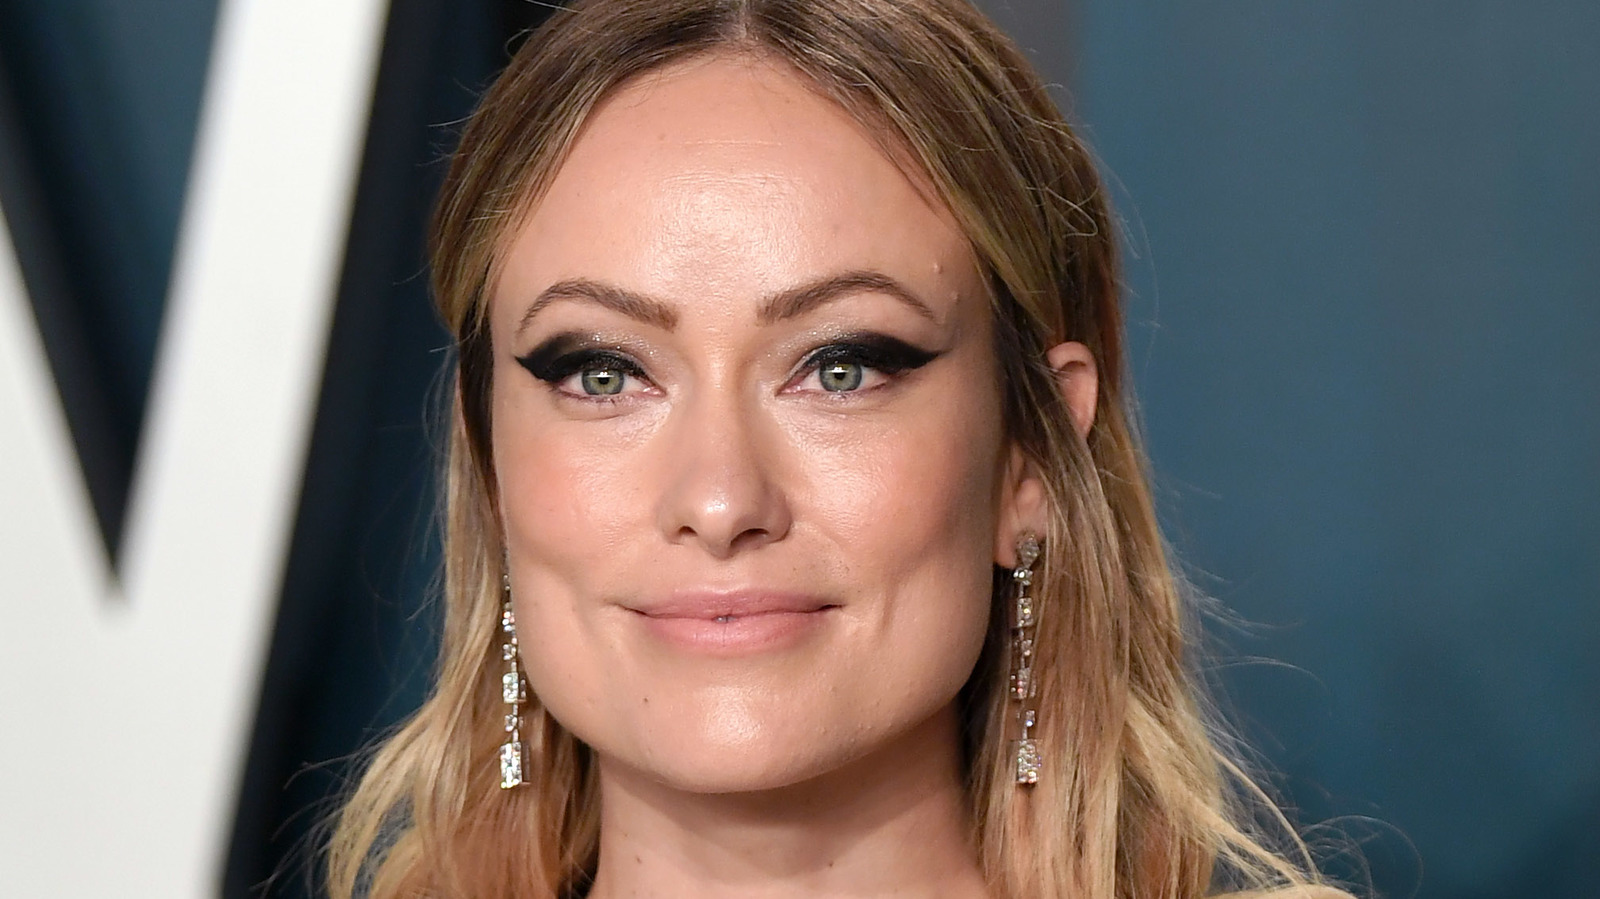 Olivia Wilde Makes A Public Statement About Harry Styles